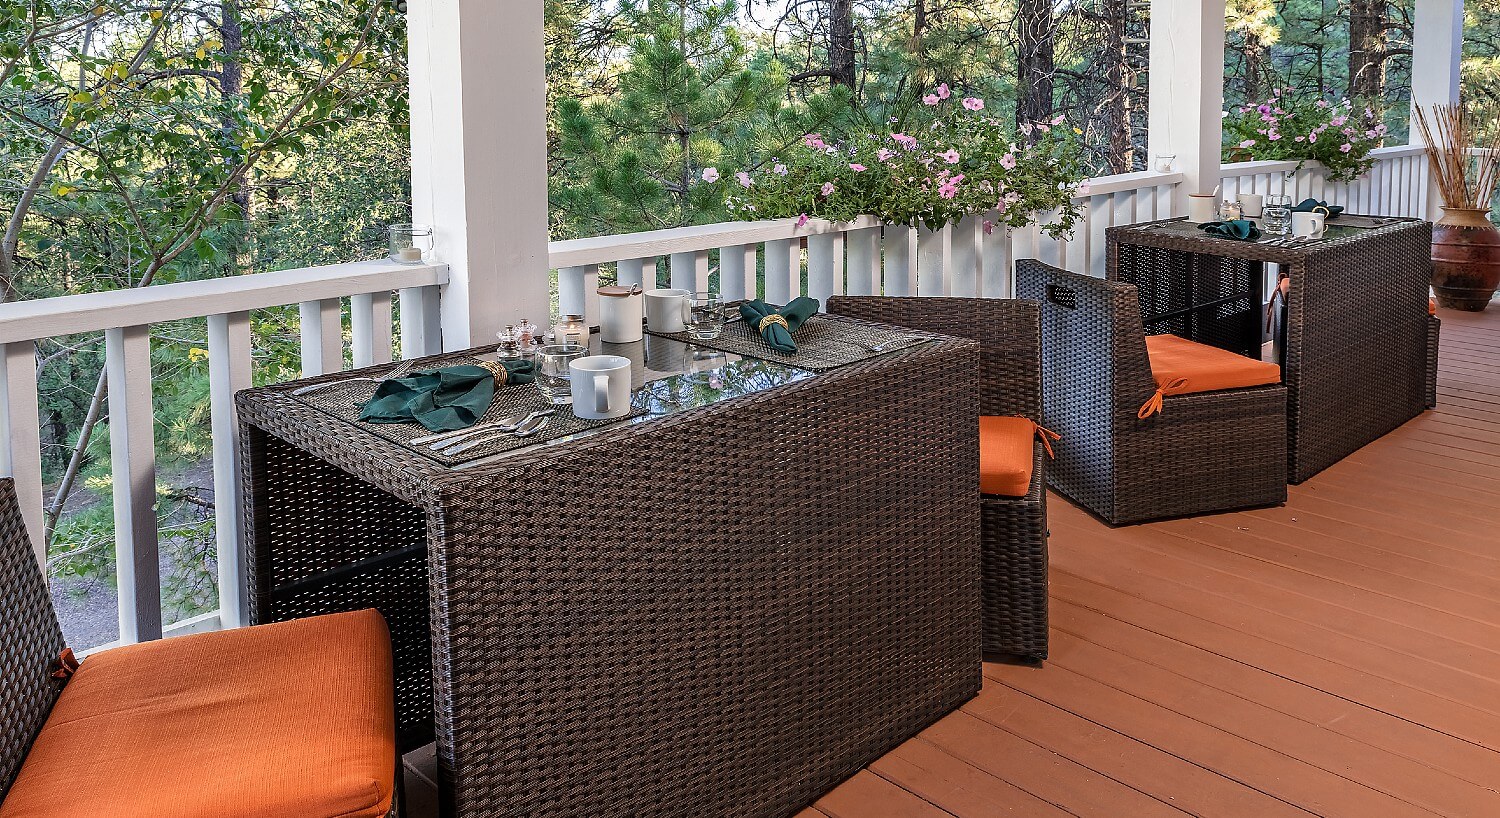 Outdoor patio with two black wicker tables and chairs set for two with flowers and lush trees in the background